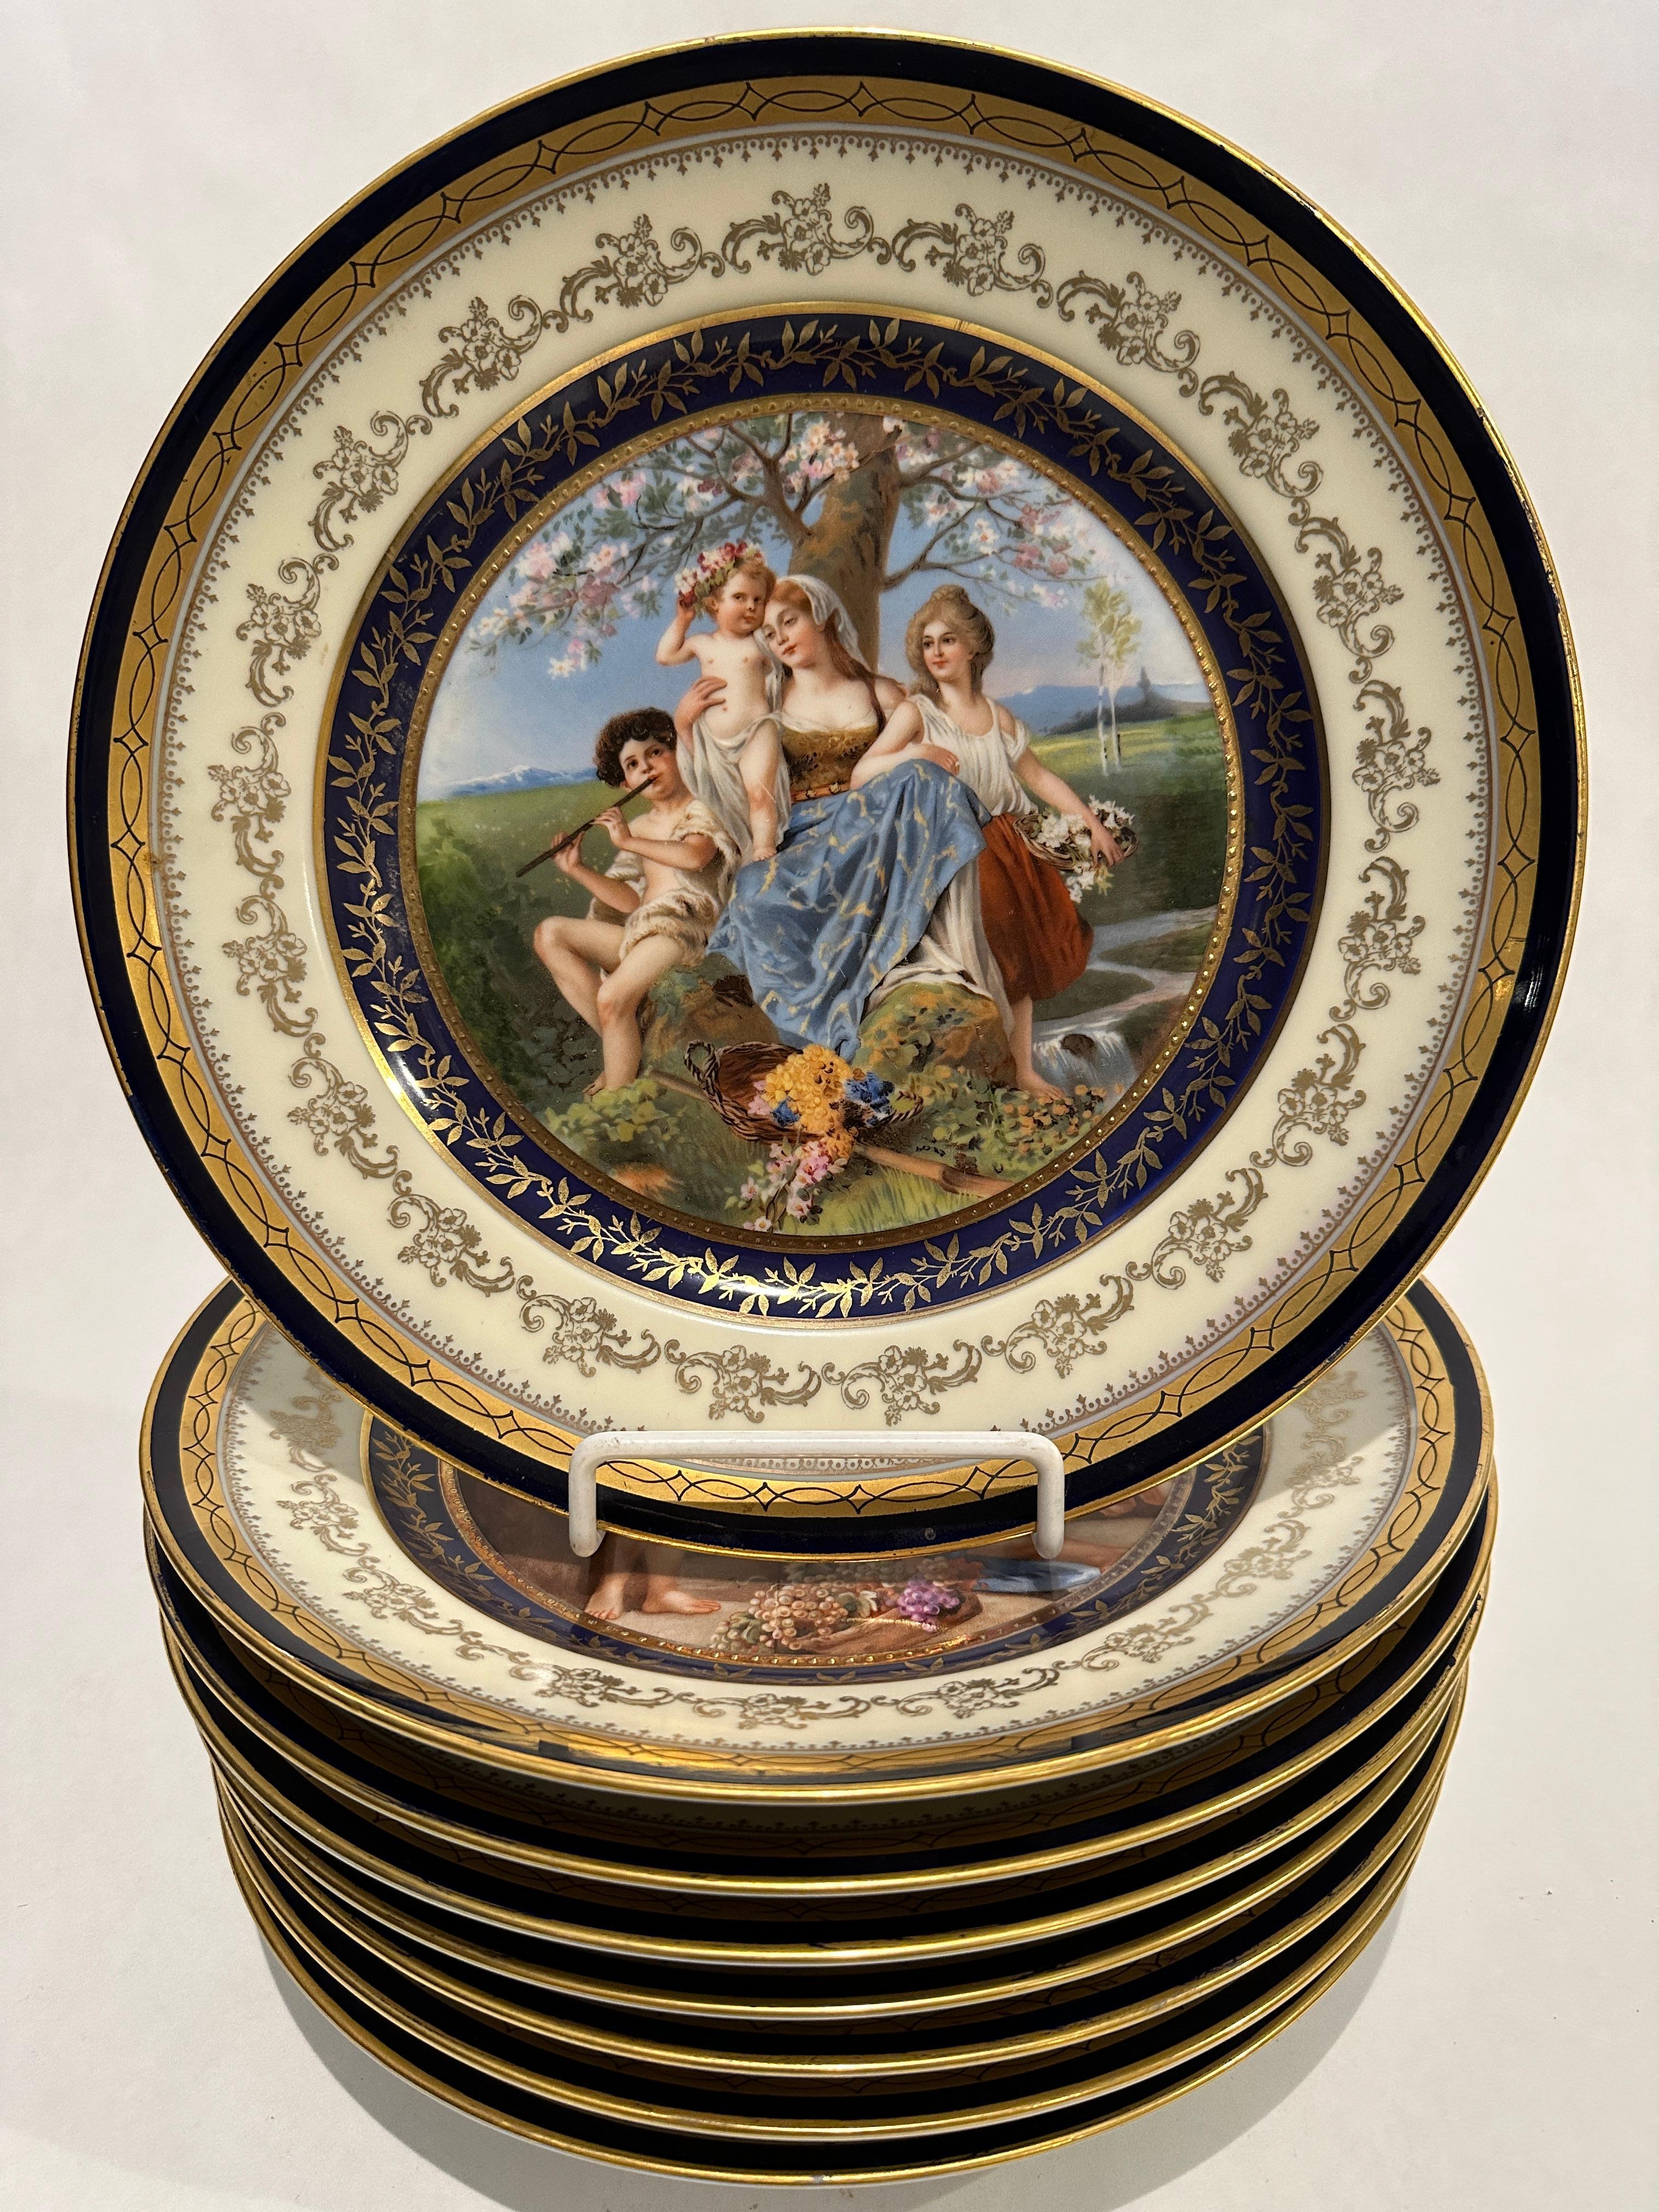 An elaborate set of 8 Continental porcelain hand painted cabinet plates with cobalt and gold borders. The plates measure 10.88 inches in diameter and depict 8 different allegorical scenes in vibrant colors. No breaks or repairs with minimal to no